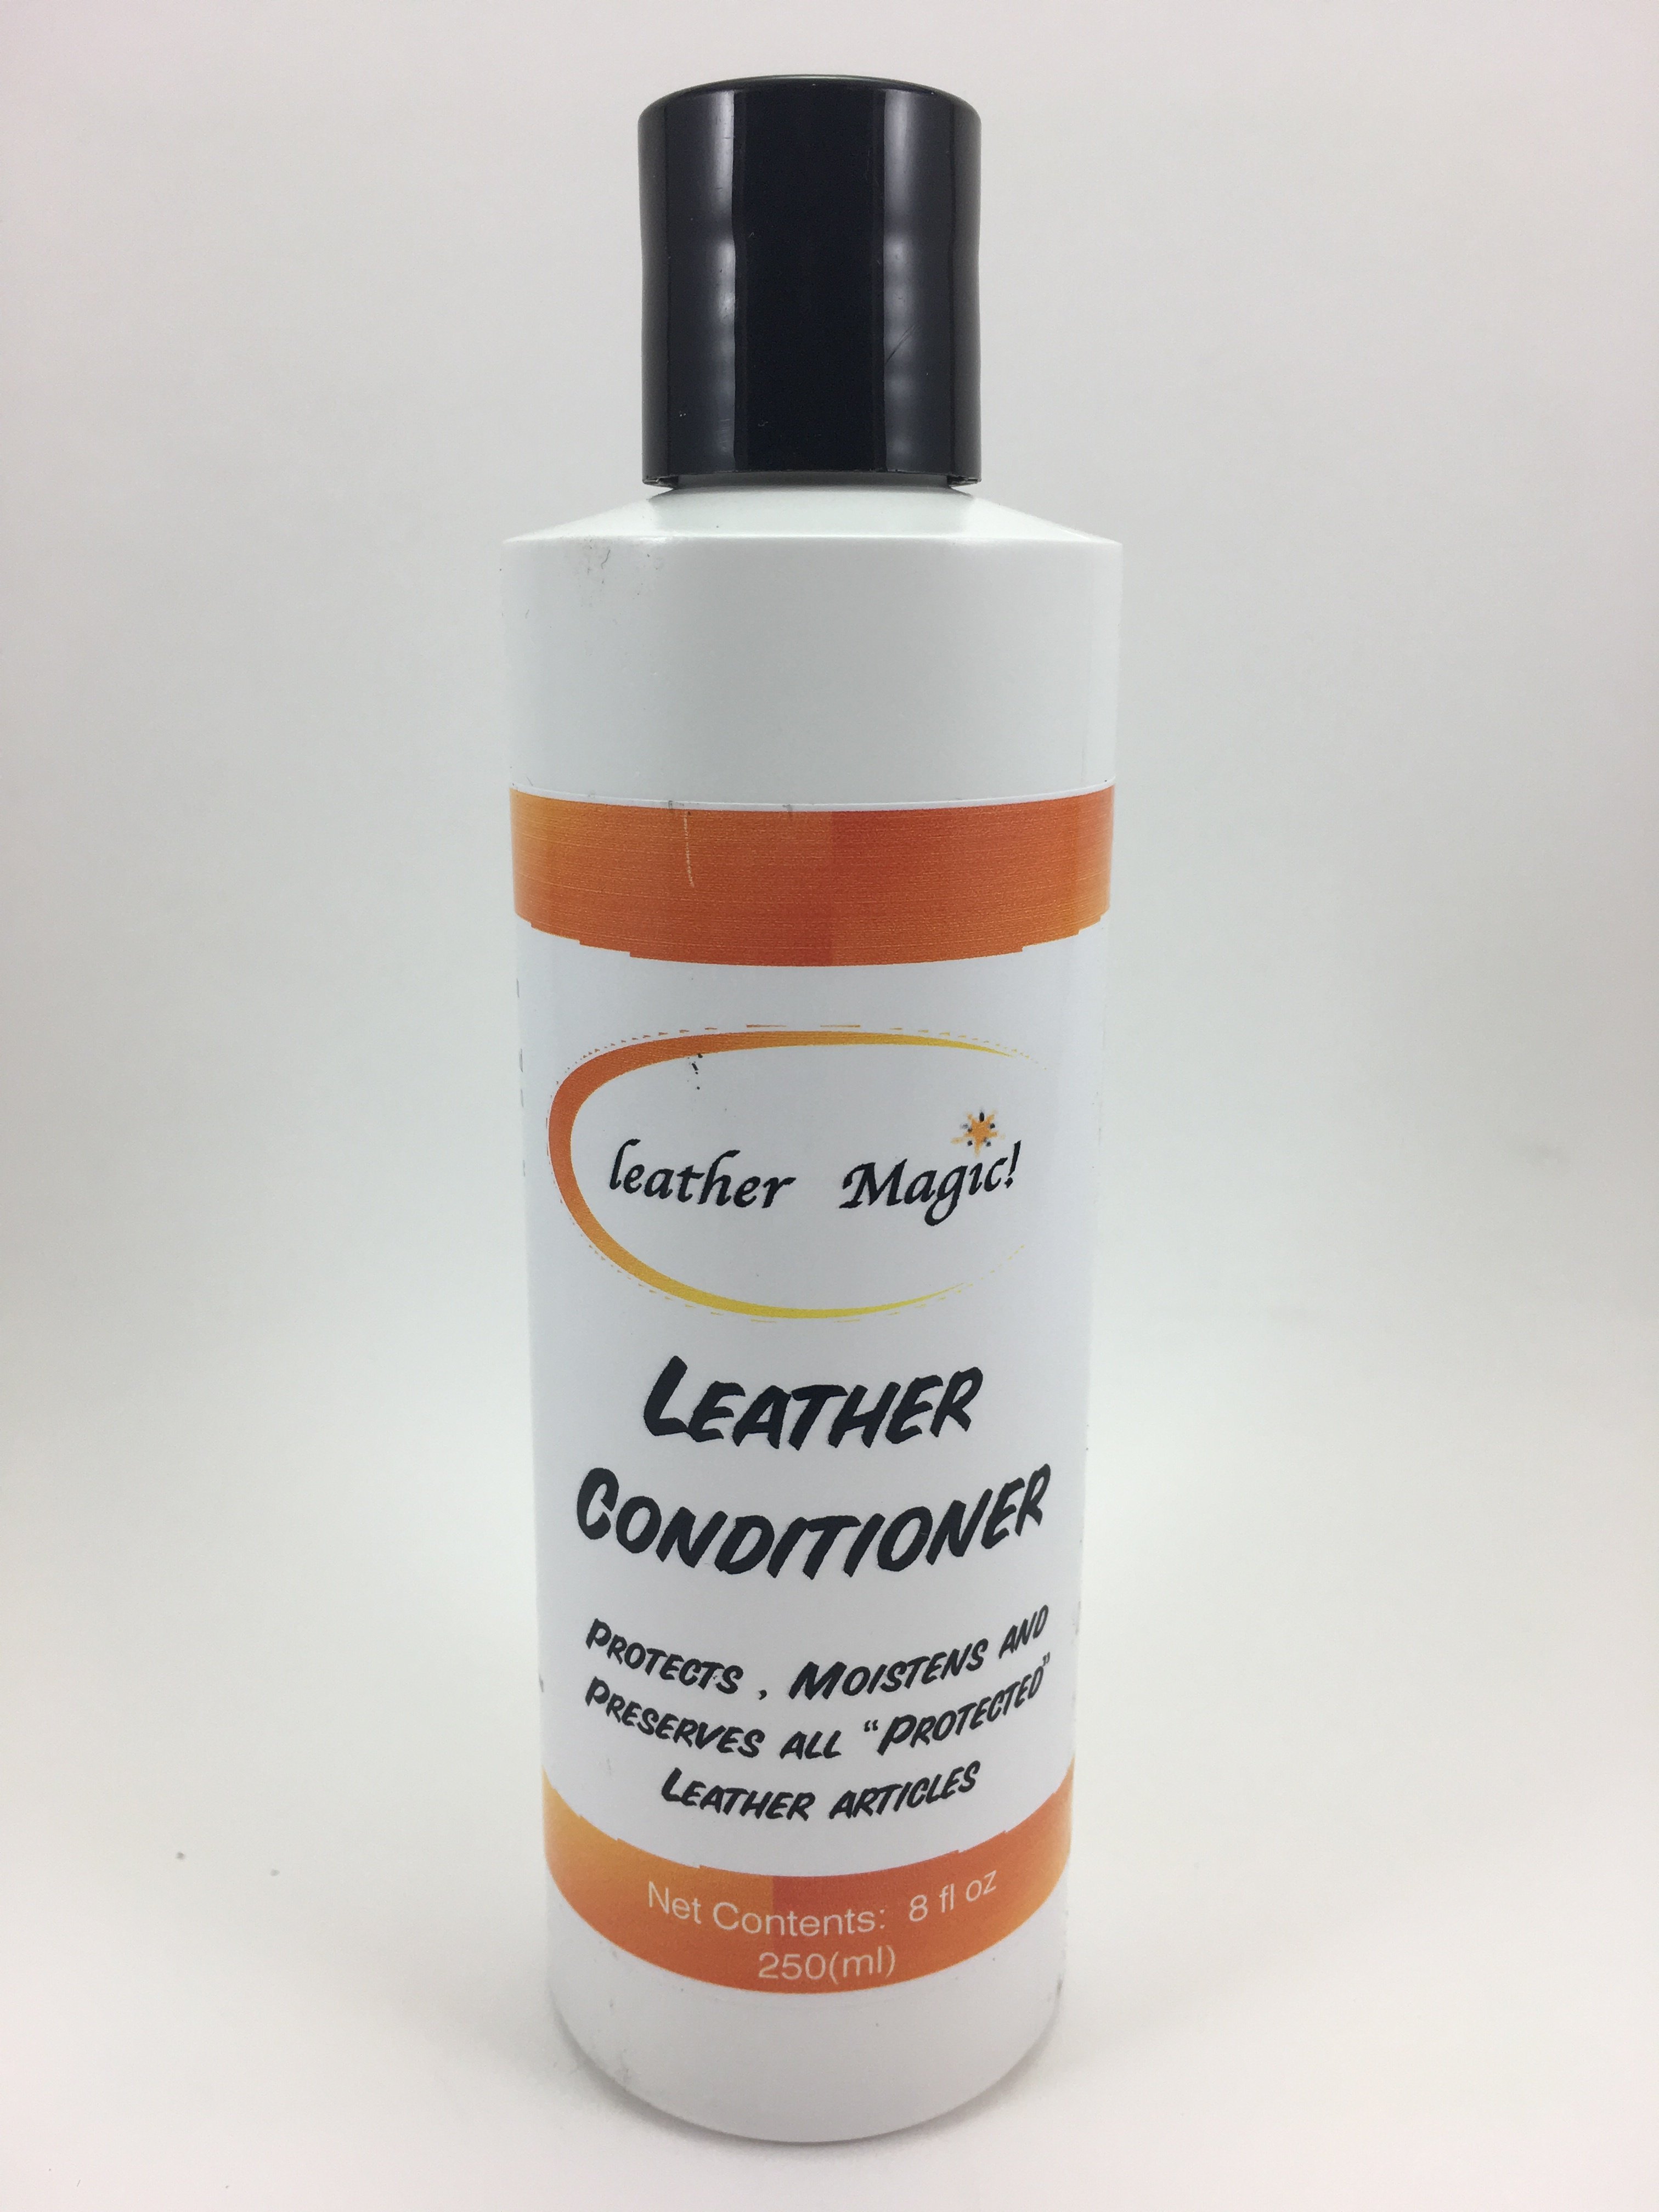 Professional Style Vinyl Repair Kit By Leather Magic!